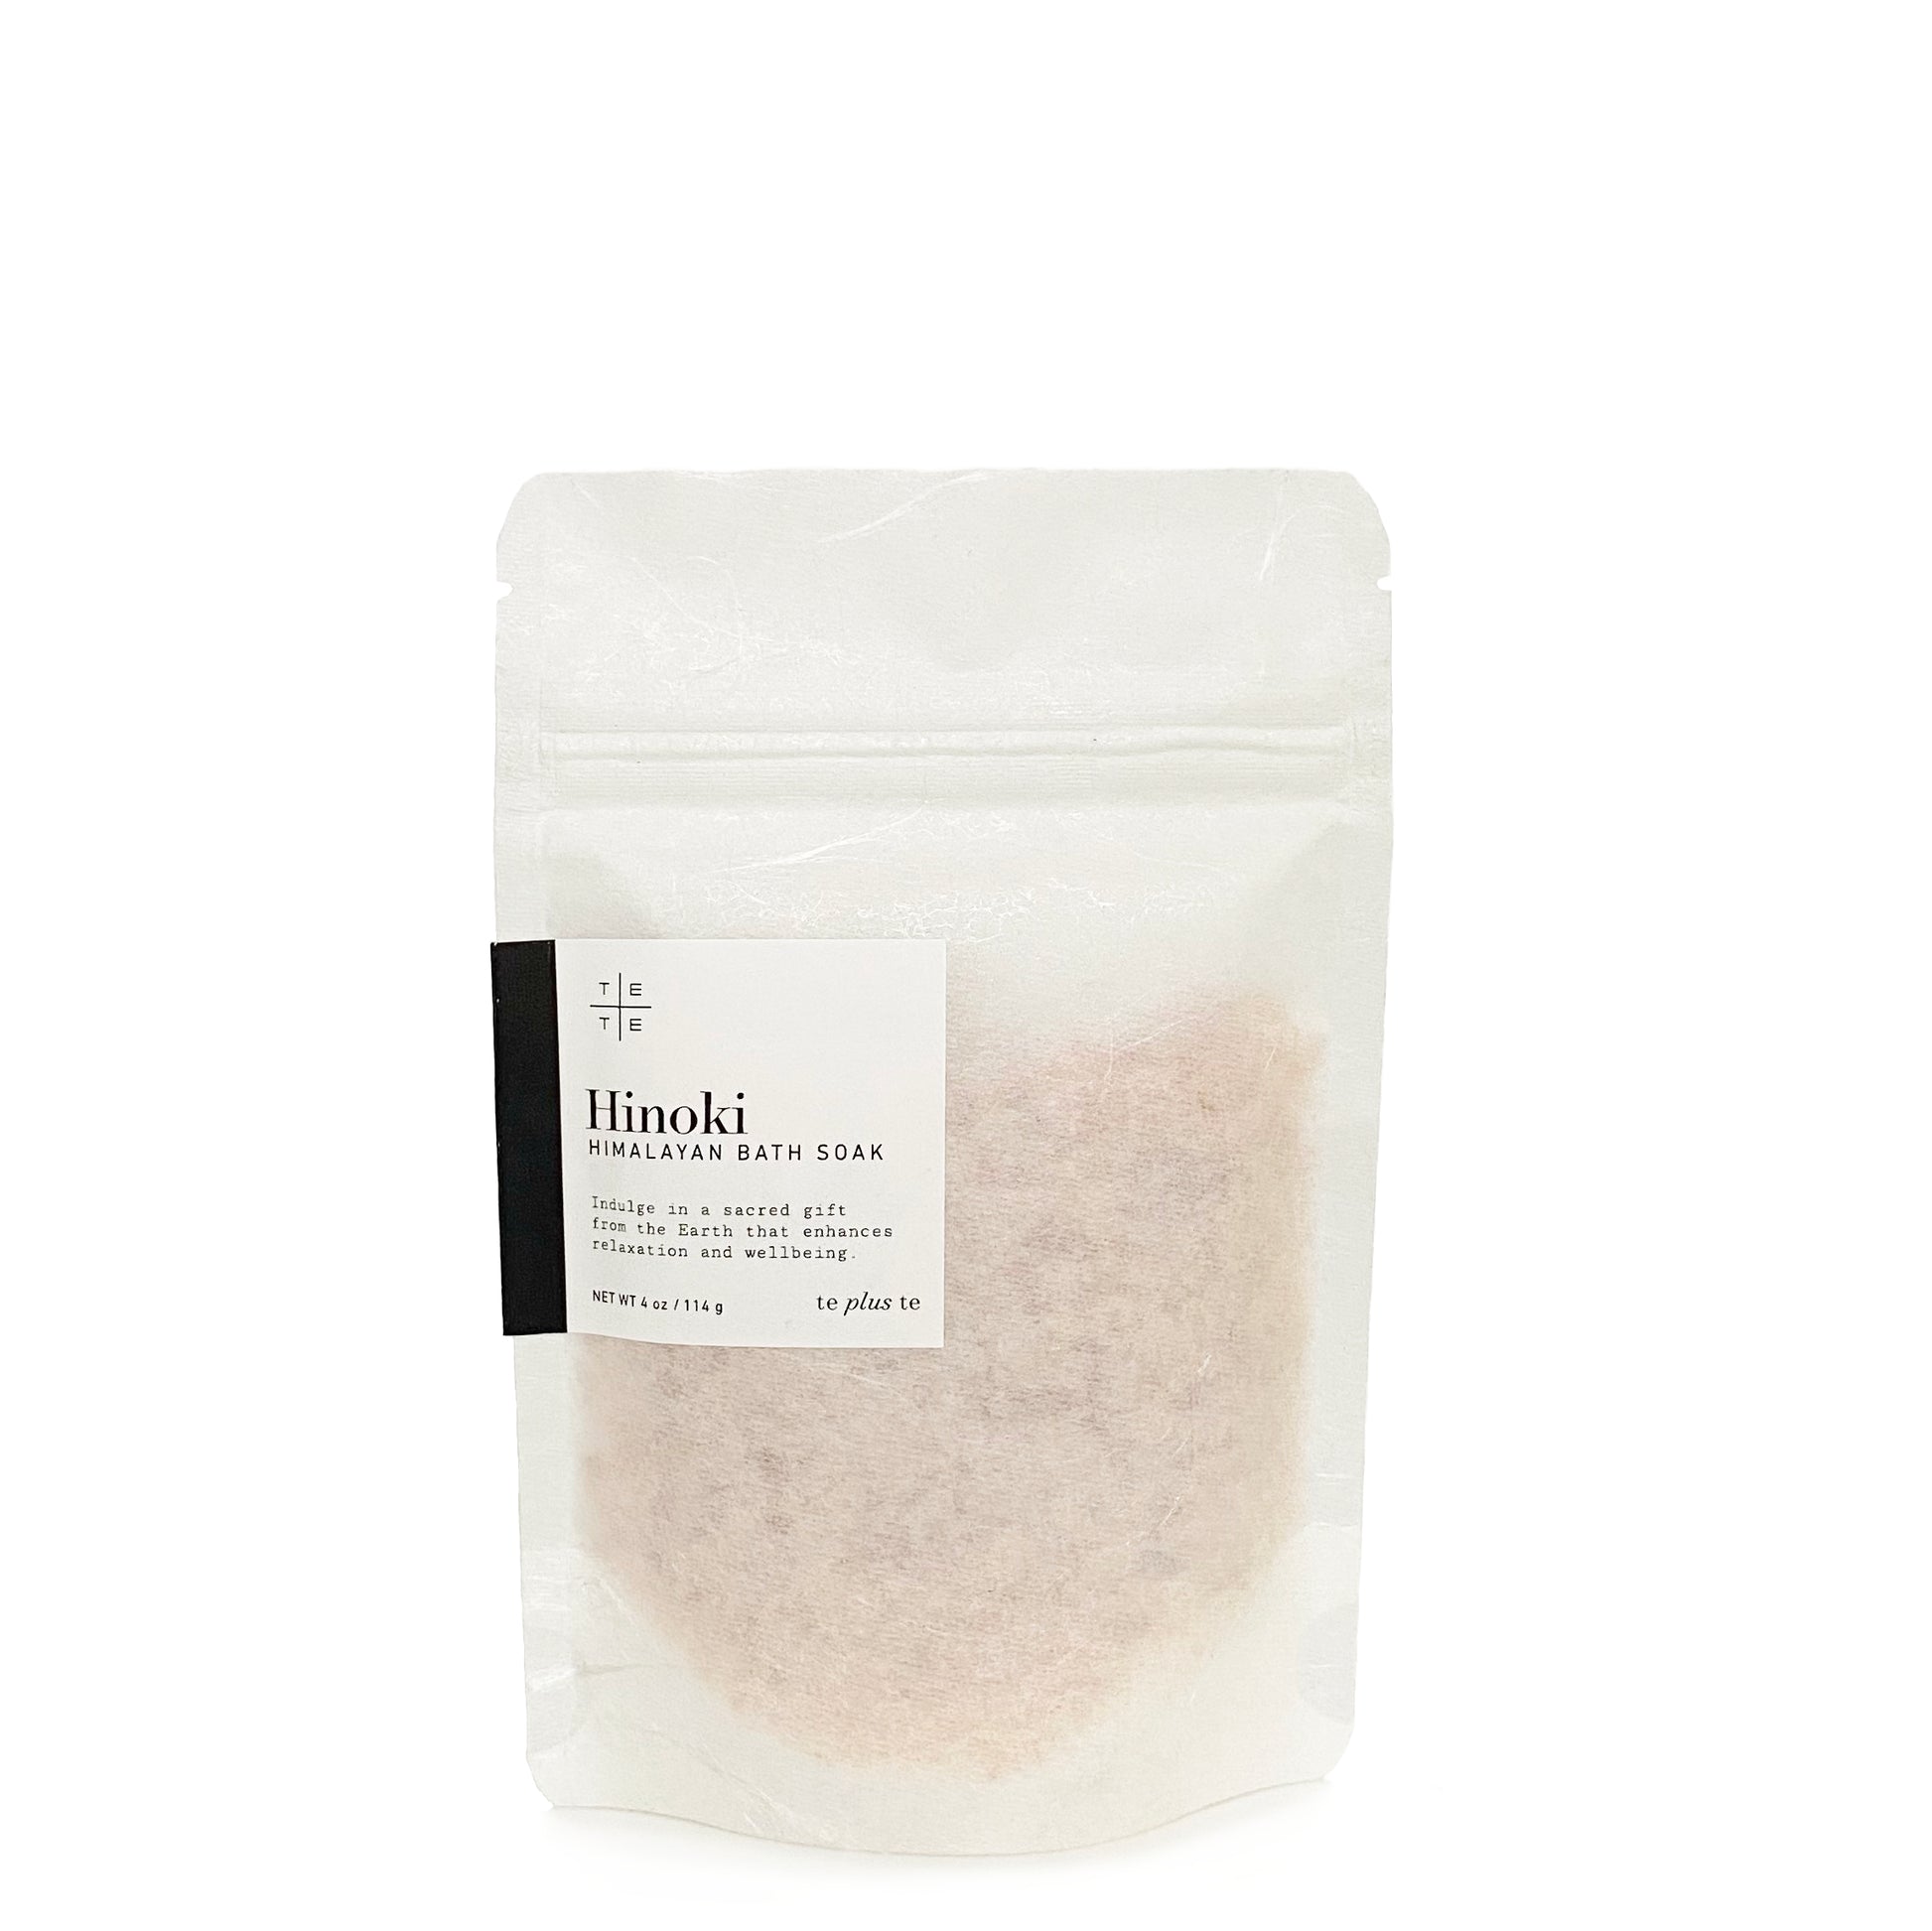 Te Plus Te Hinoki Himalayan Bath Soak 4 oz Made with a blend of certified pure Himalayan salt and Hinoki essential oil. It comes in a convenient pack of salt.